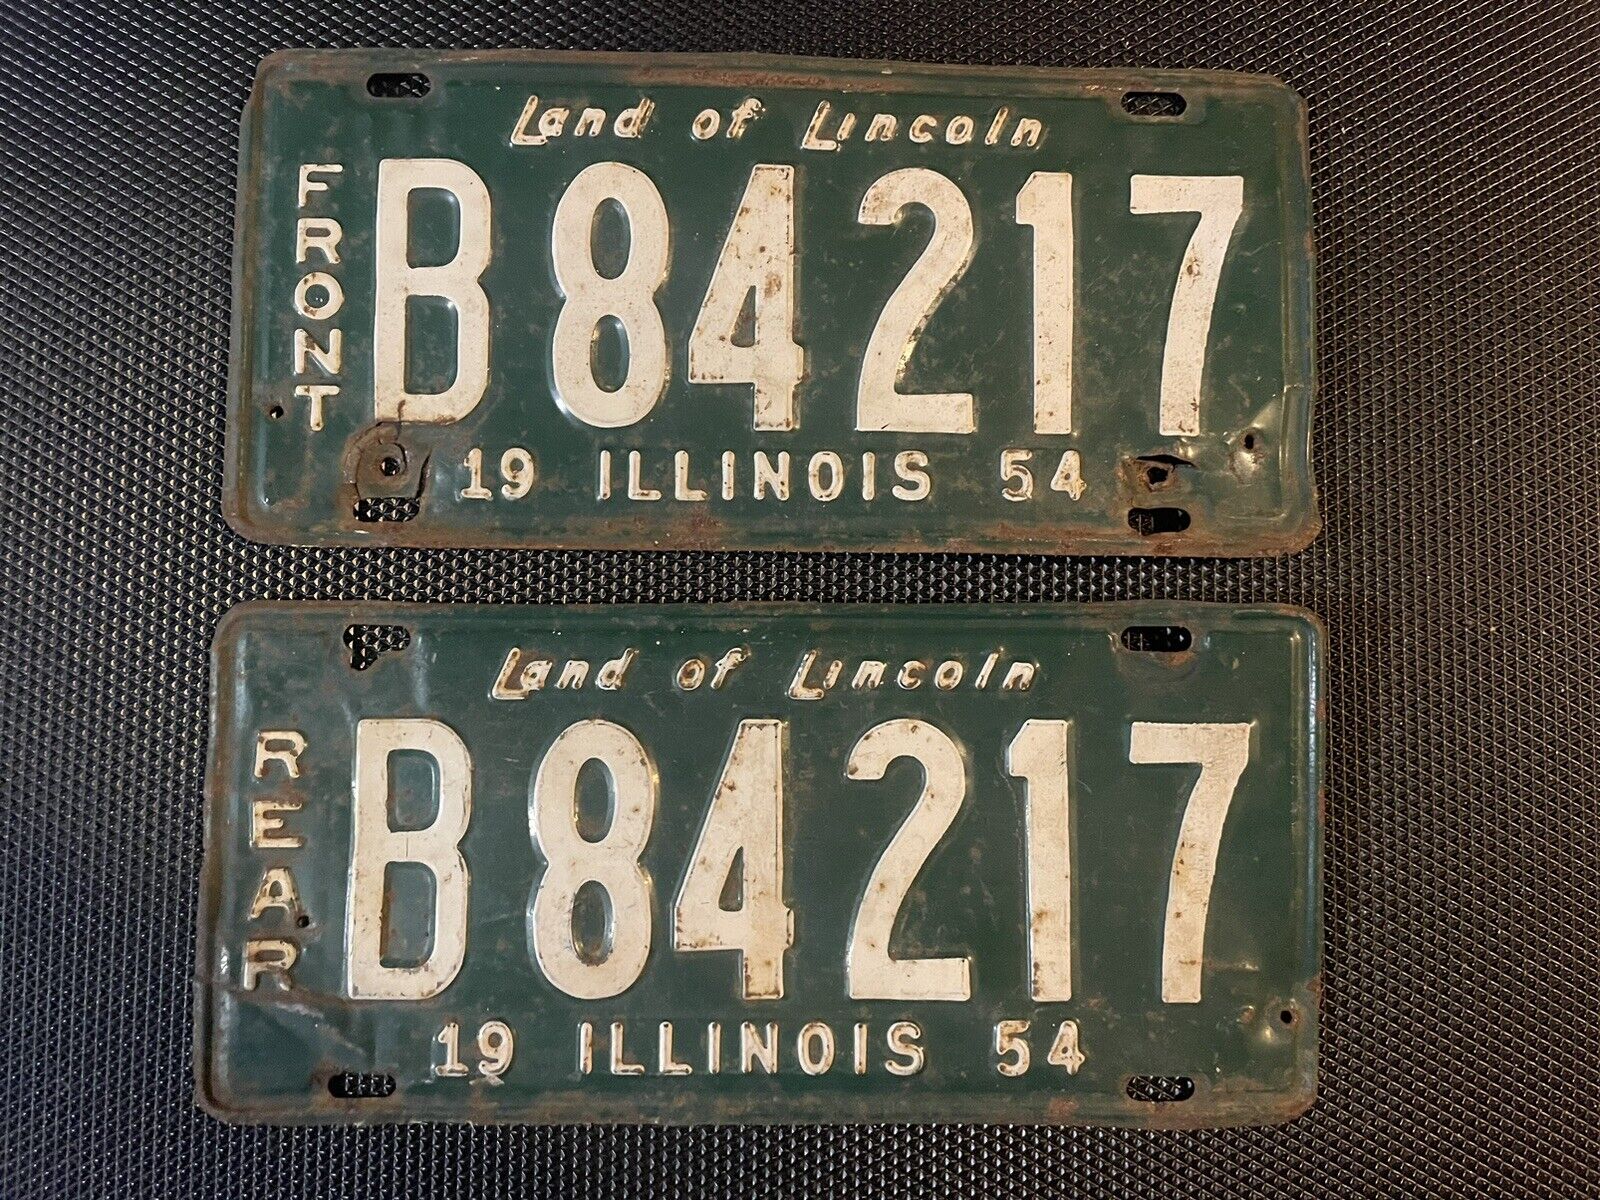 ILLINOIS PAIR OF TRUCK LICENSE PLATES 1954 B 84217 FRONT REAR